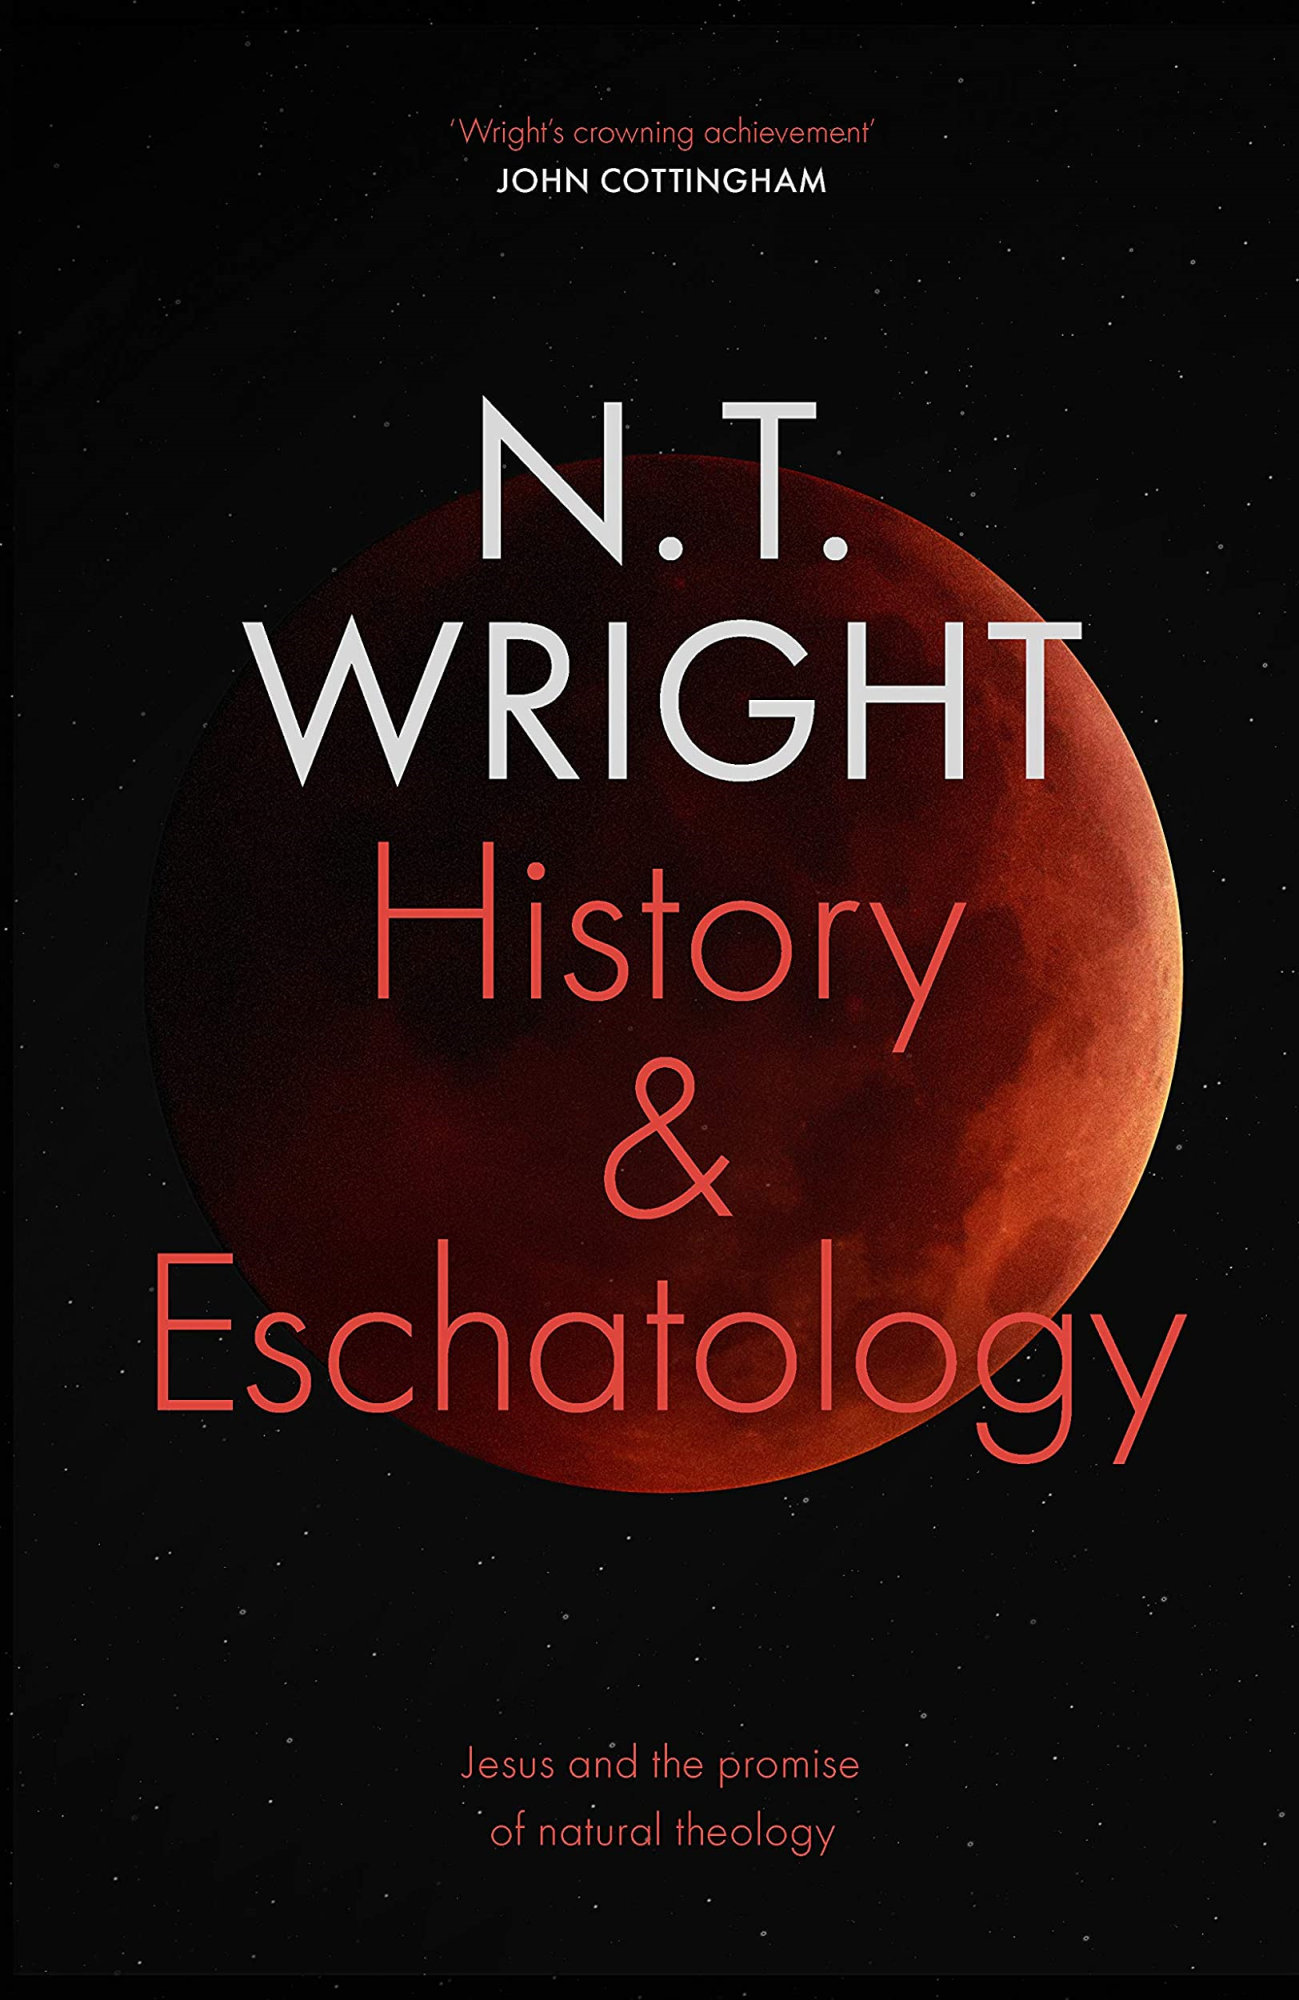 LIbri UK/US Wright, N.T. - History And Eschatology: Jesus And The Promise Of Natural Theology NUOVO SIGILLATO, EDIZIONE DEL 17/01/2019 SUBITO DISPONIBILE